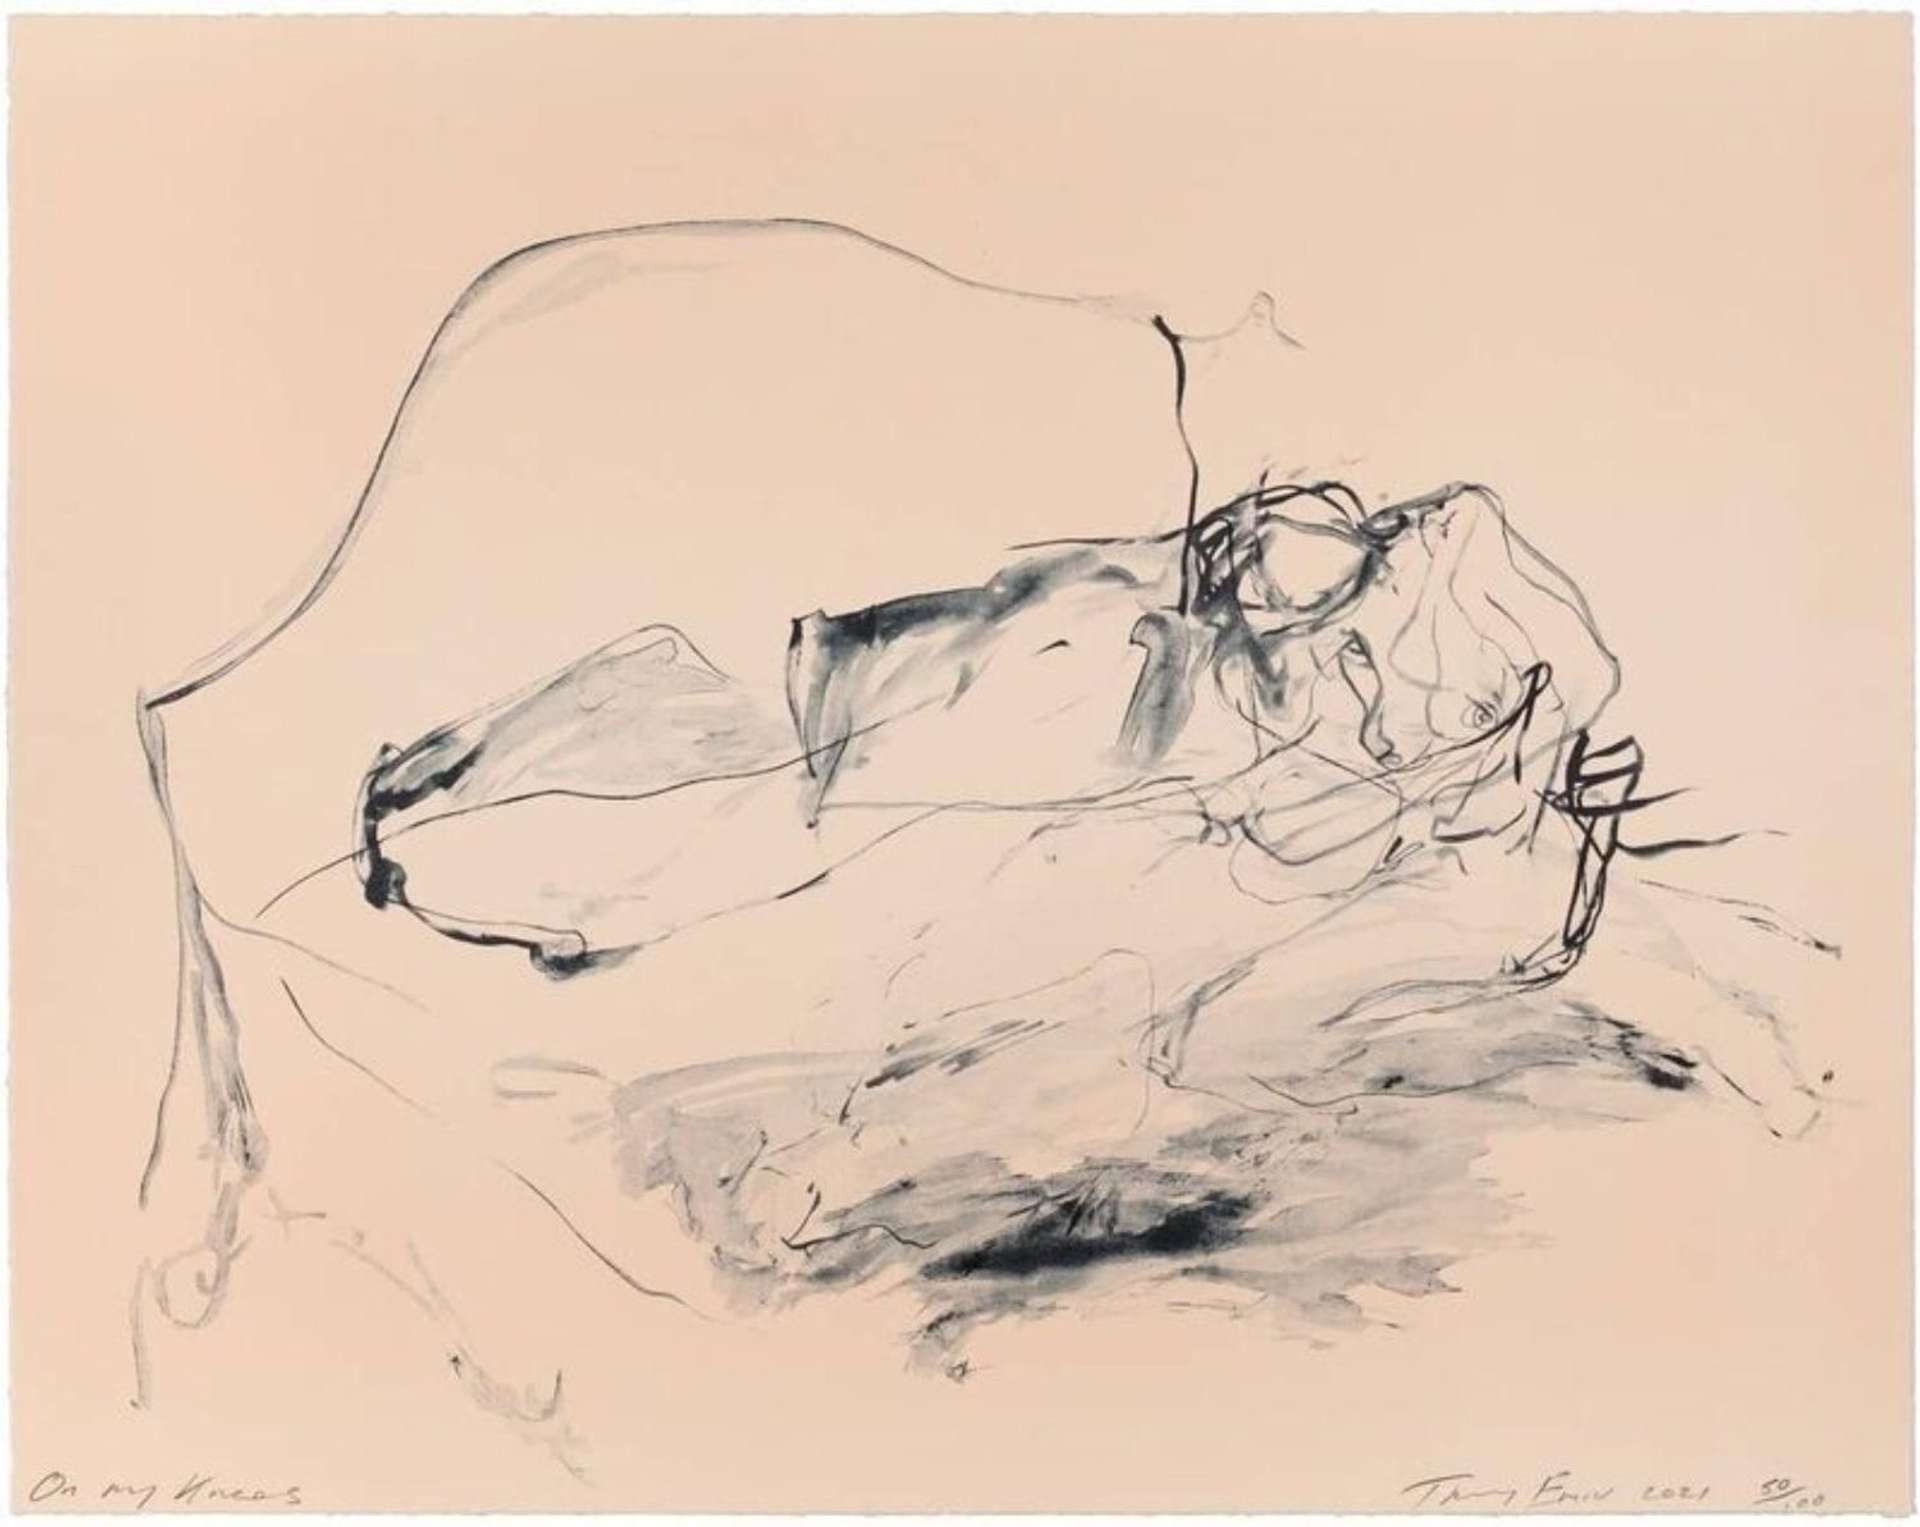 A lithograph by Tracey Emin fluidly depicting a figure in a bed